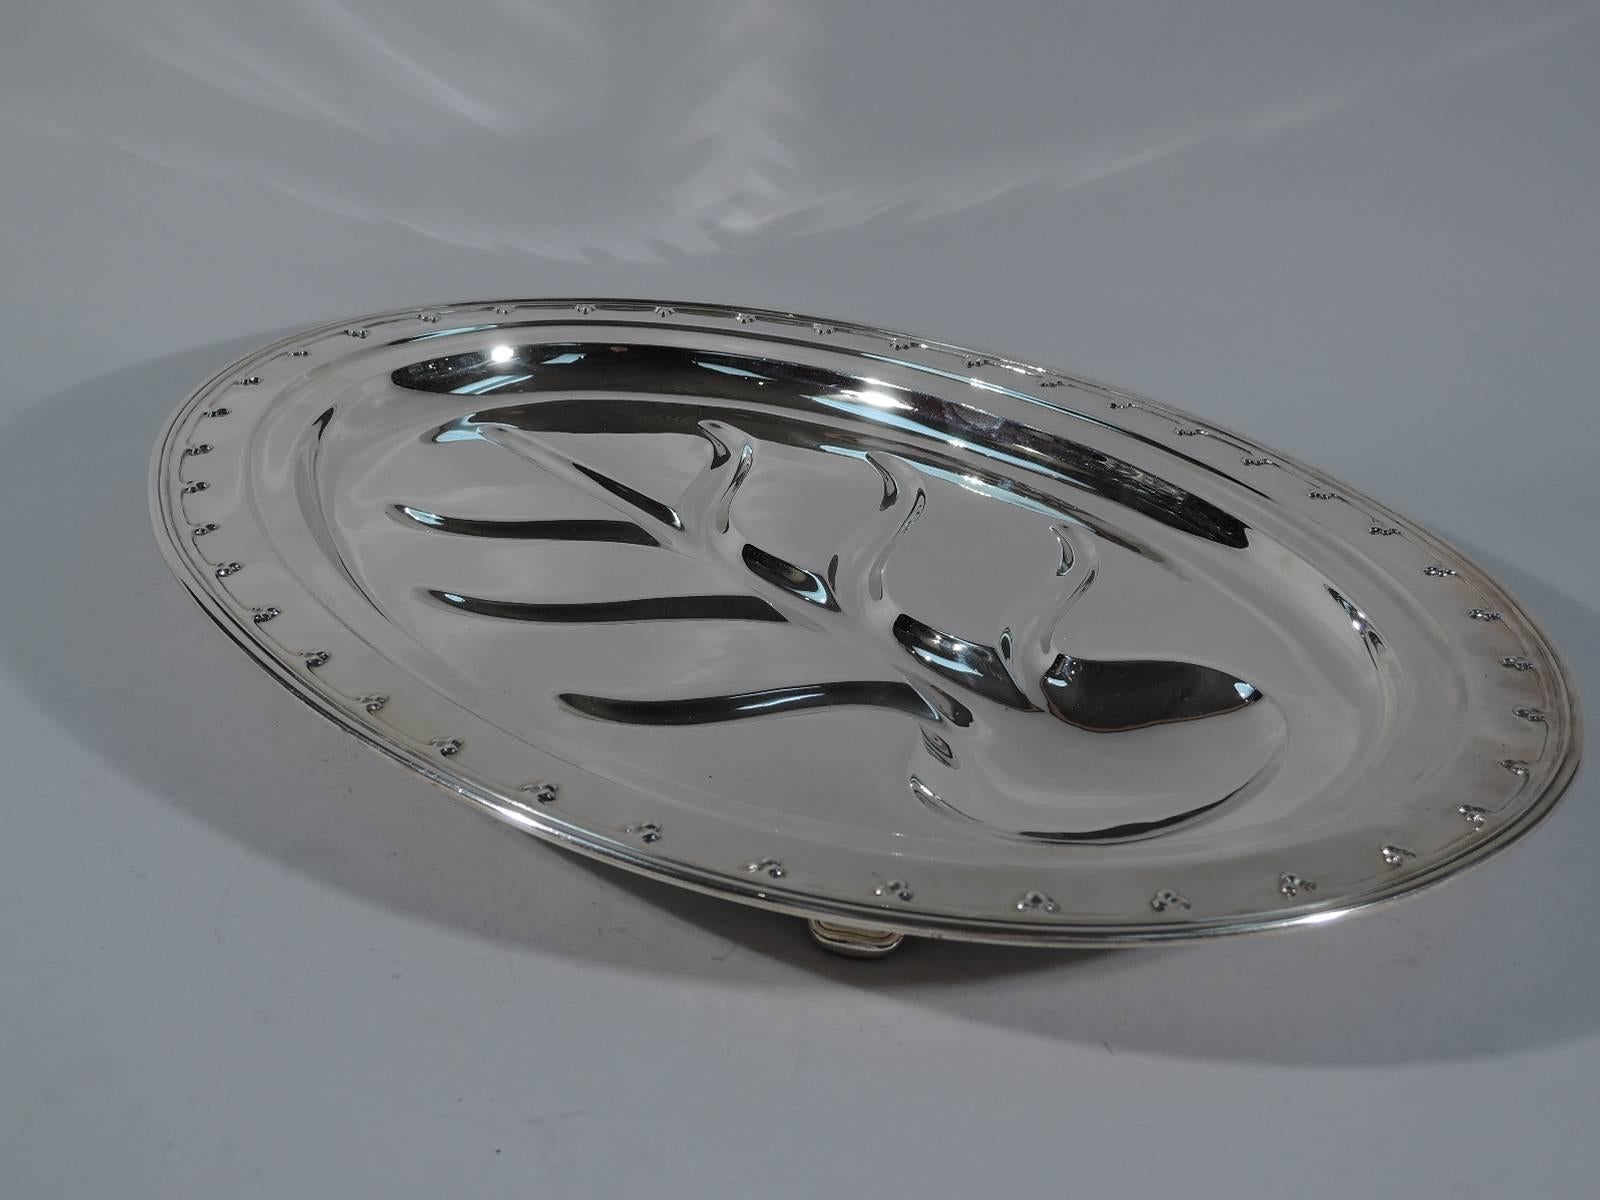 Sterling silver meat platter in Saint Dunstan pattern. Made by Tiffany & Co. in New York, ca 1921. Oval with applied fleur-de-lys rim. Well has traditional Tree of Life “canals” to collect the rivulets of precious pan juices. Rests on 4 supports. A